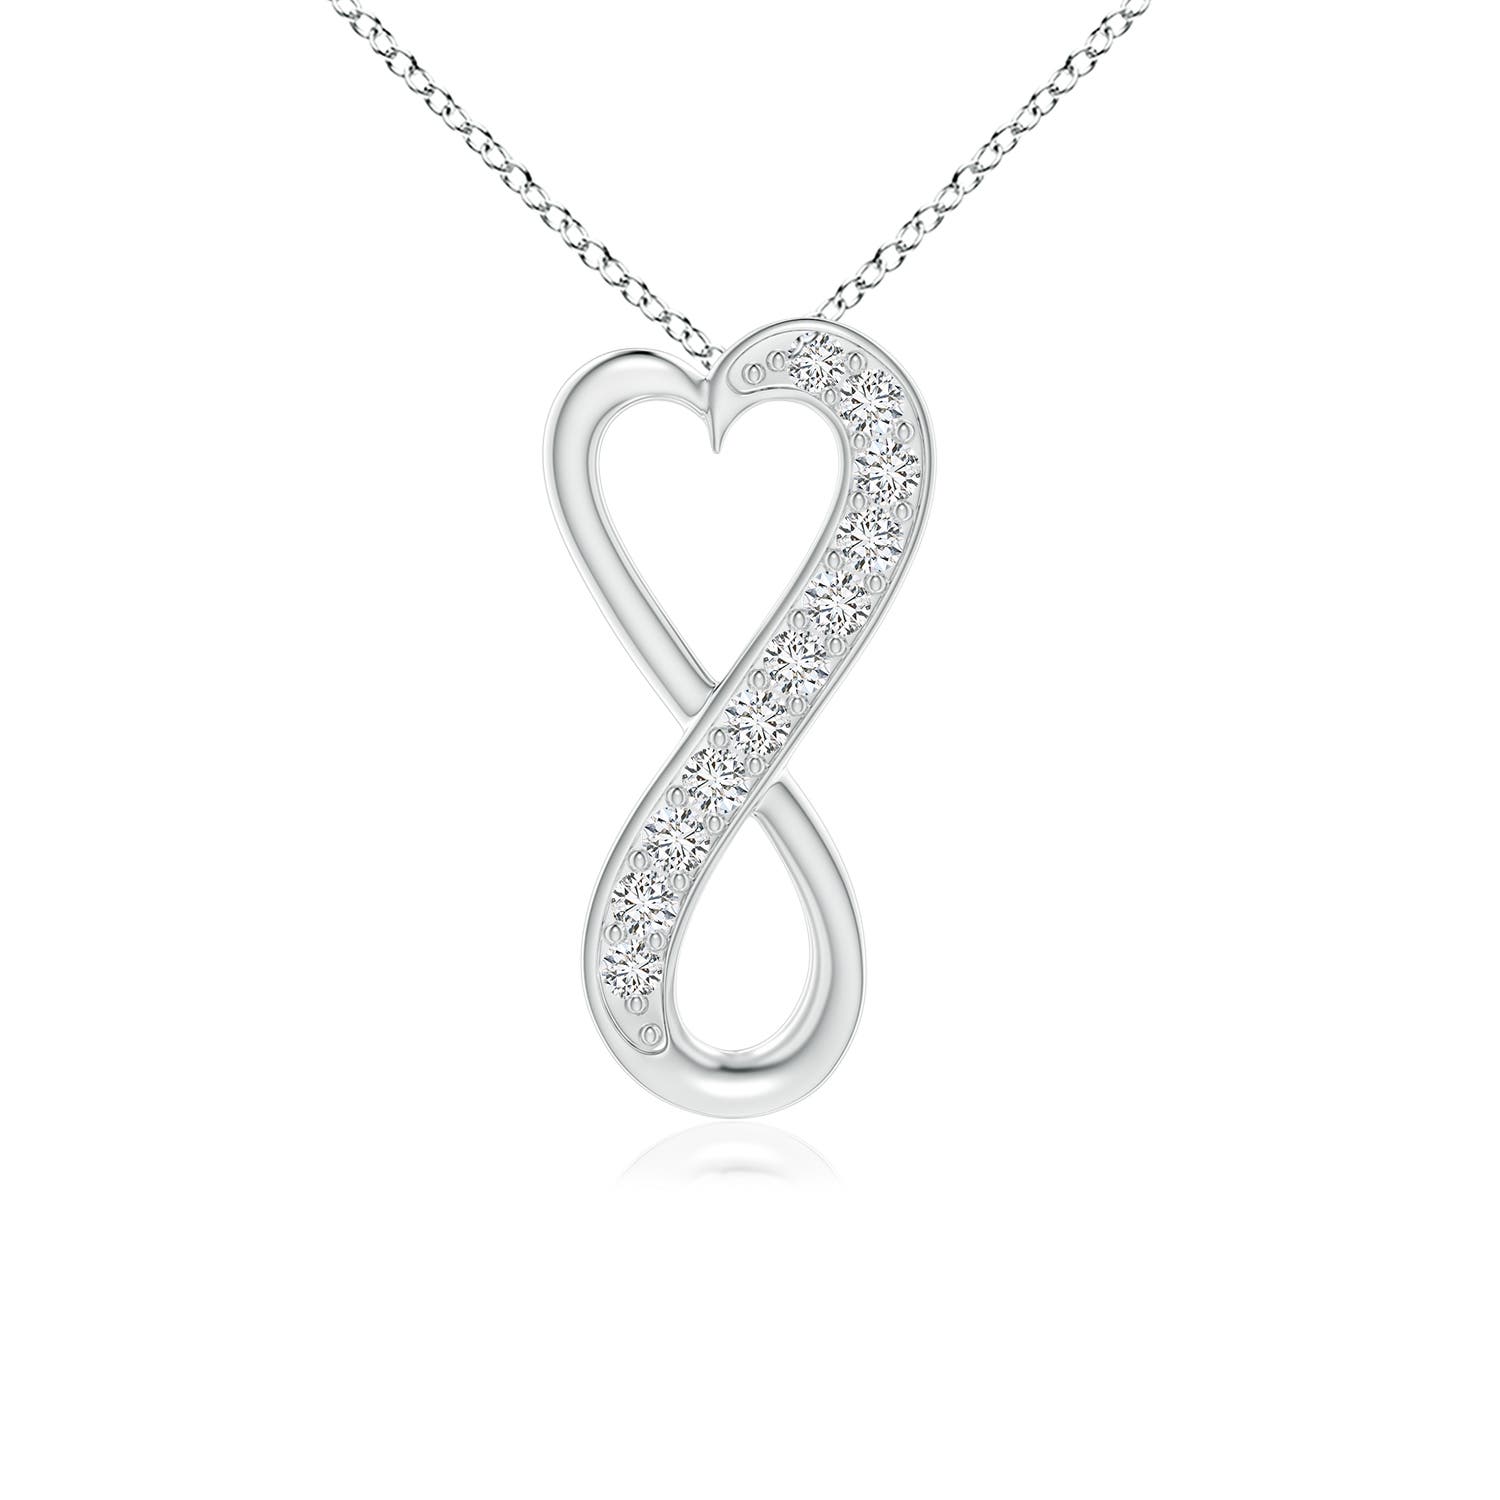 H, SI2 / 0.11 CT / 14 KT White Gold